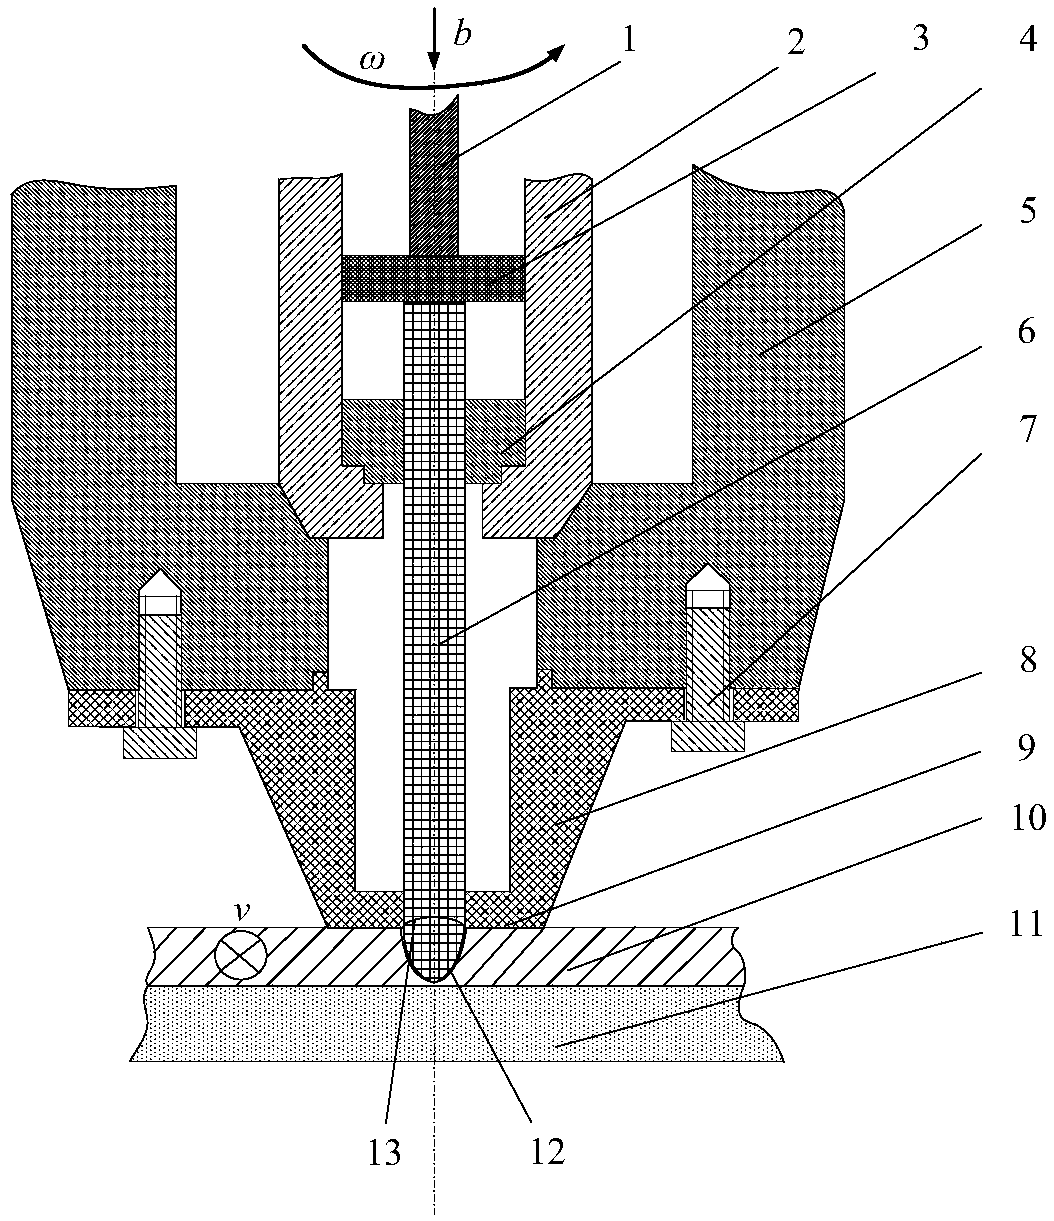 Stationary shaft shoulder friction stir welding method capable of coaxially adding materials by forming groove